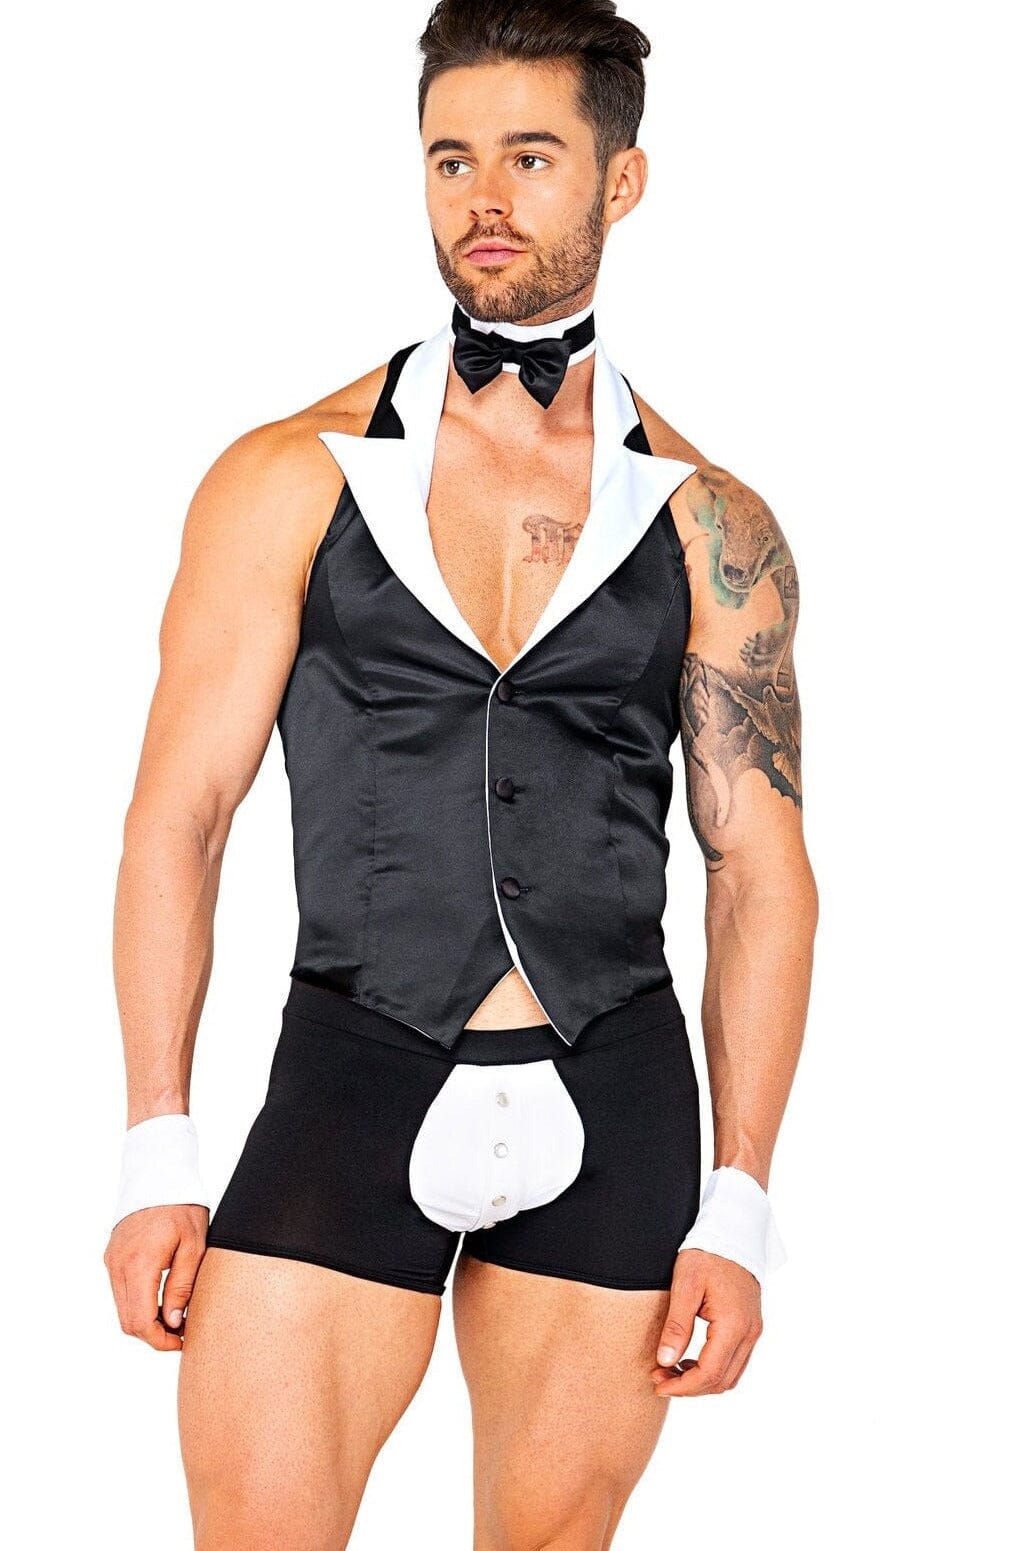 4pc Butler Beefcake-Other Costumes-Roma Costumes-SEXYSHOES.COM